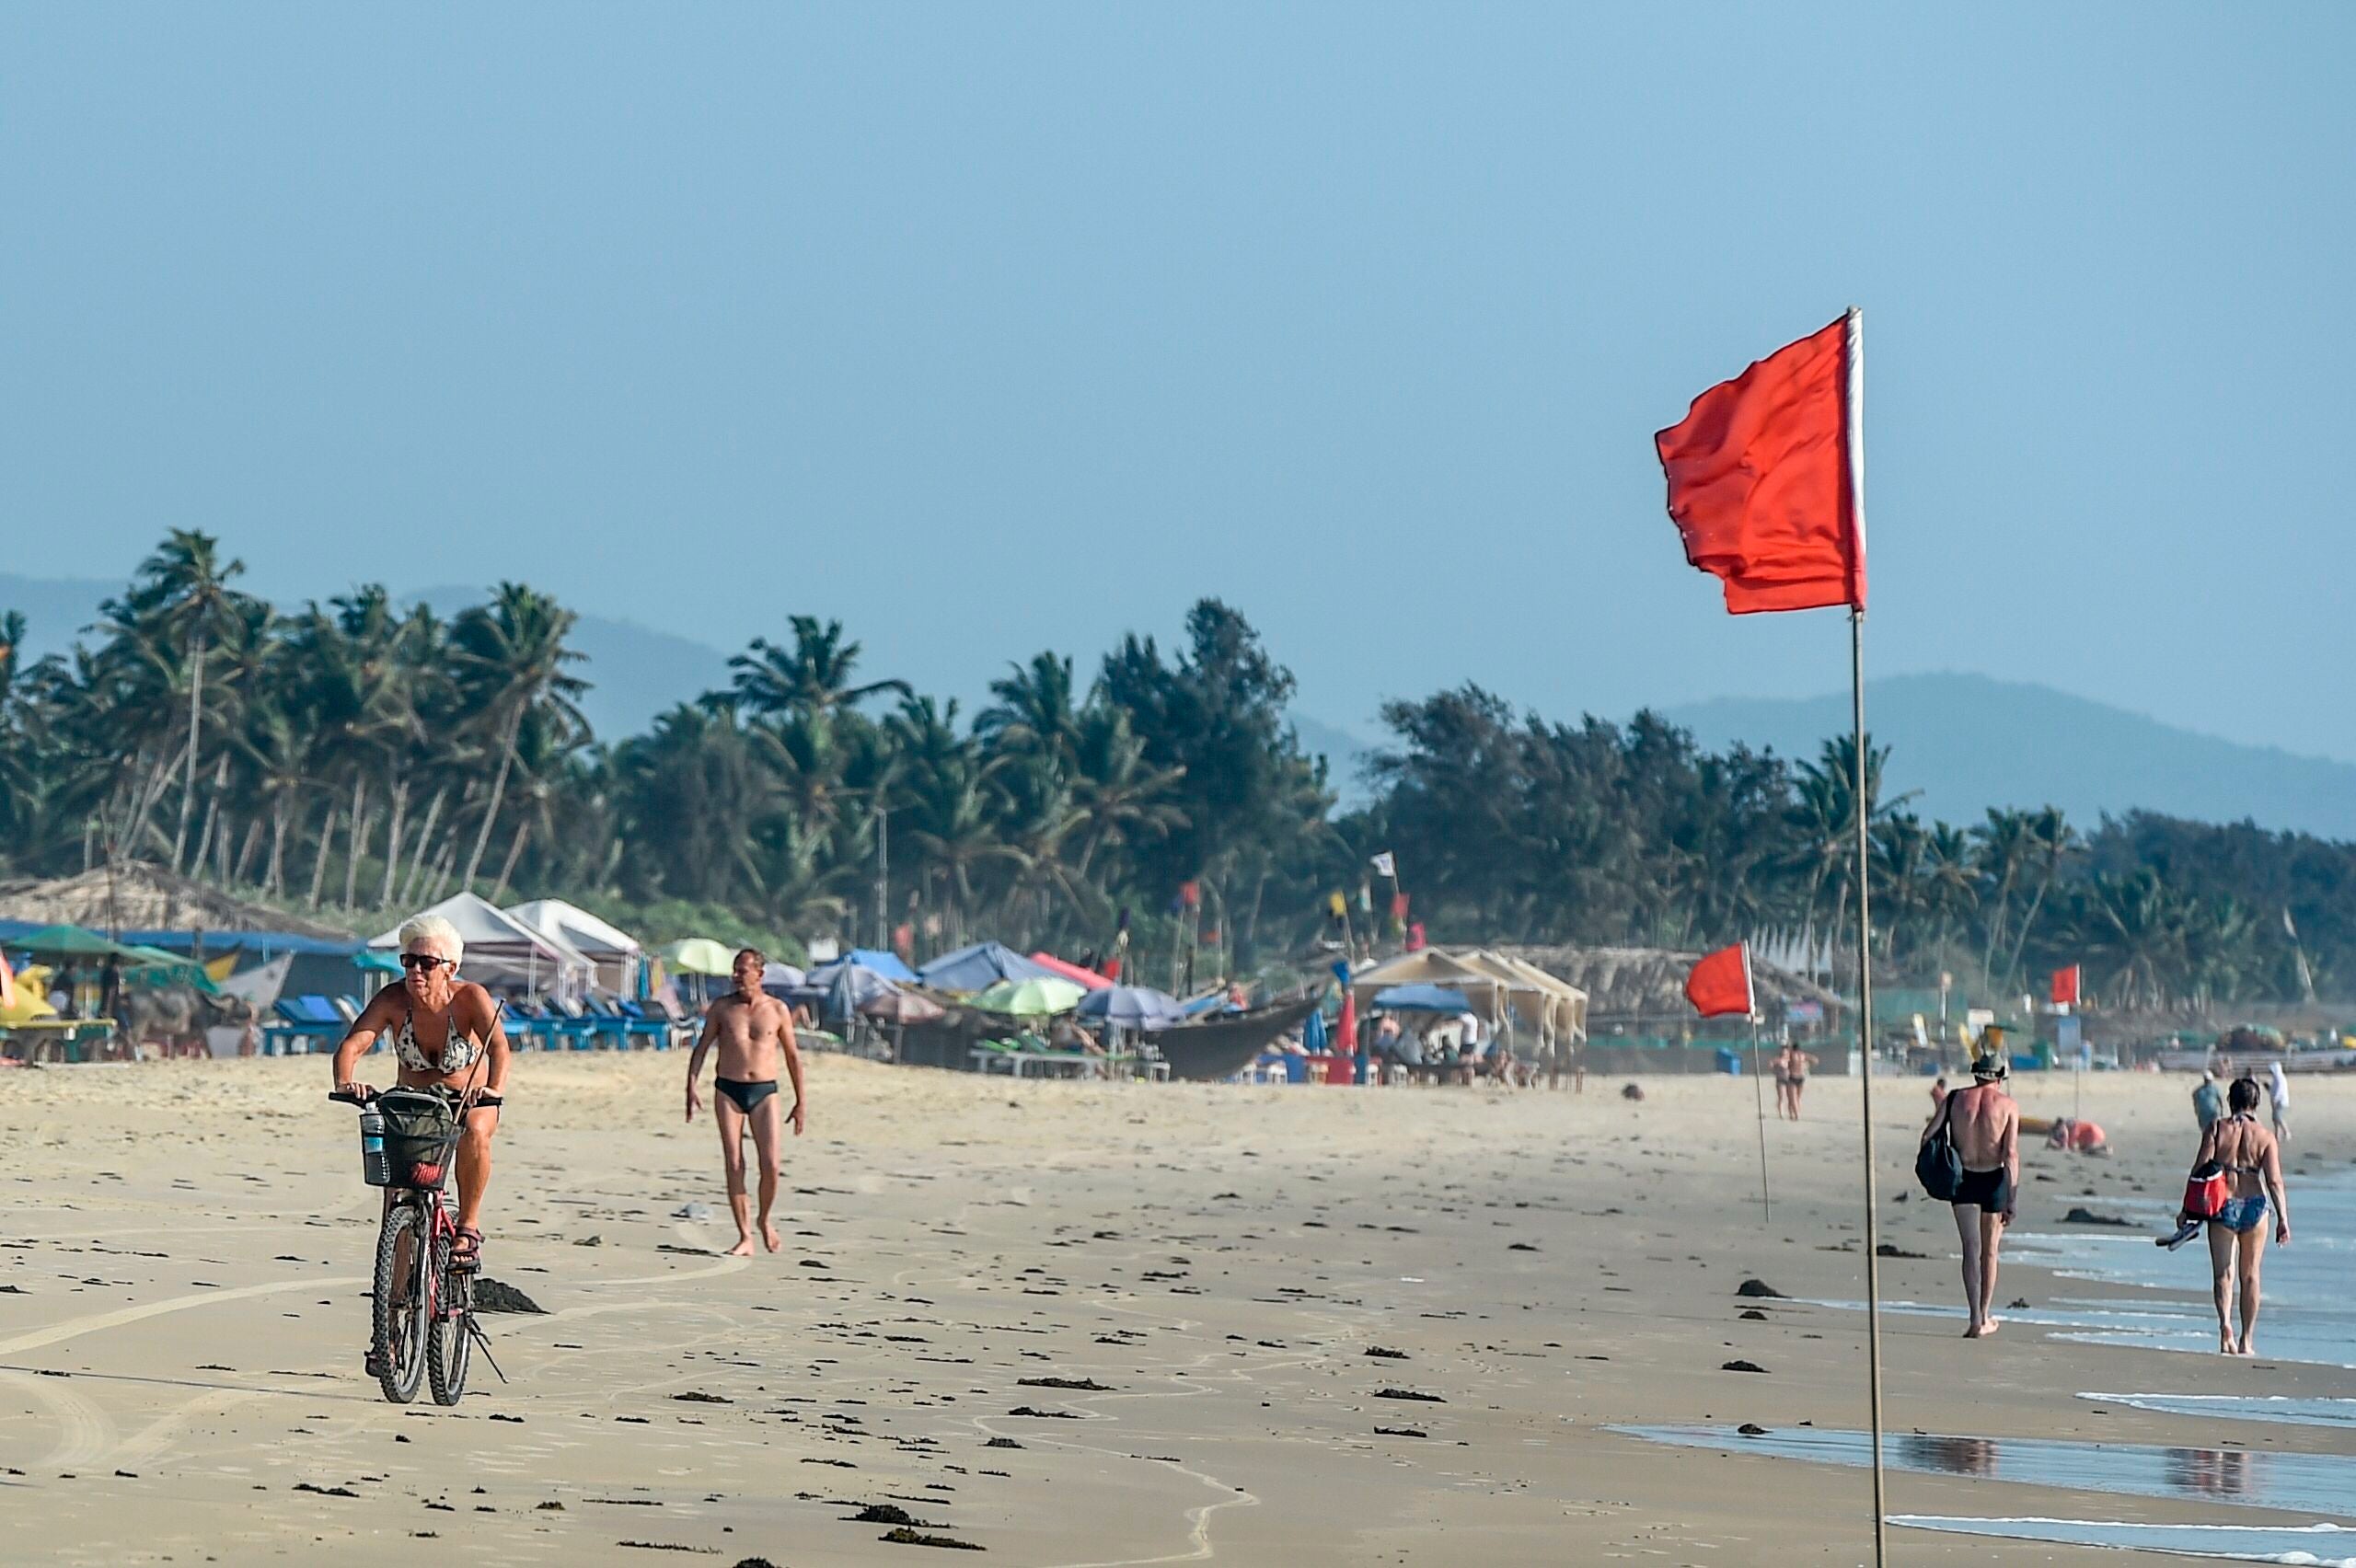 File: Foreigners enjoy walking and riding bikes on the beach in Goa on 13 March 2020